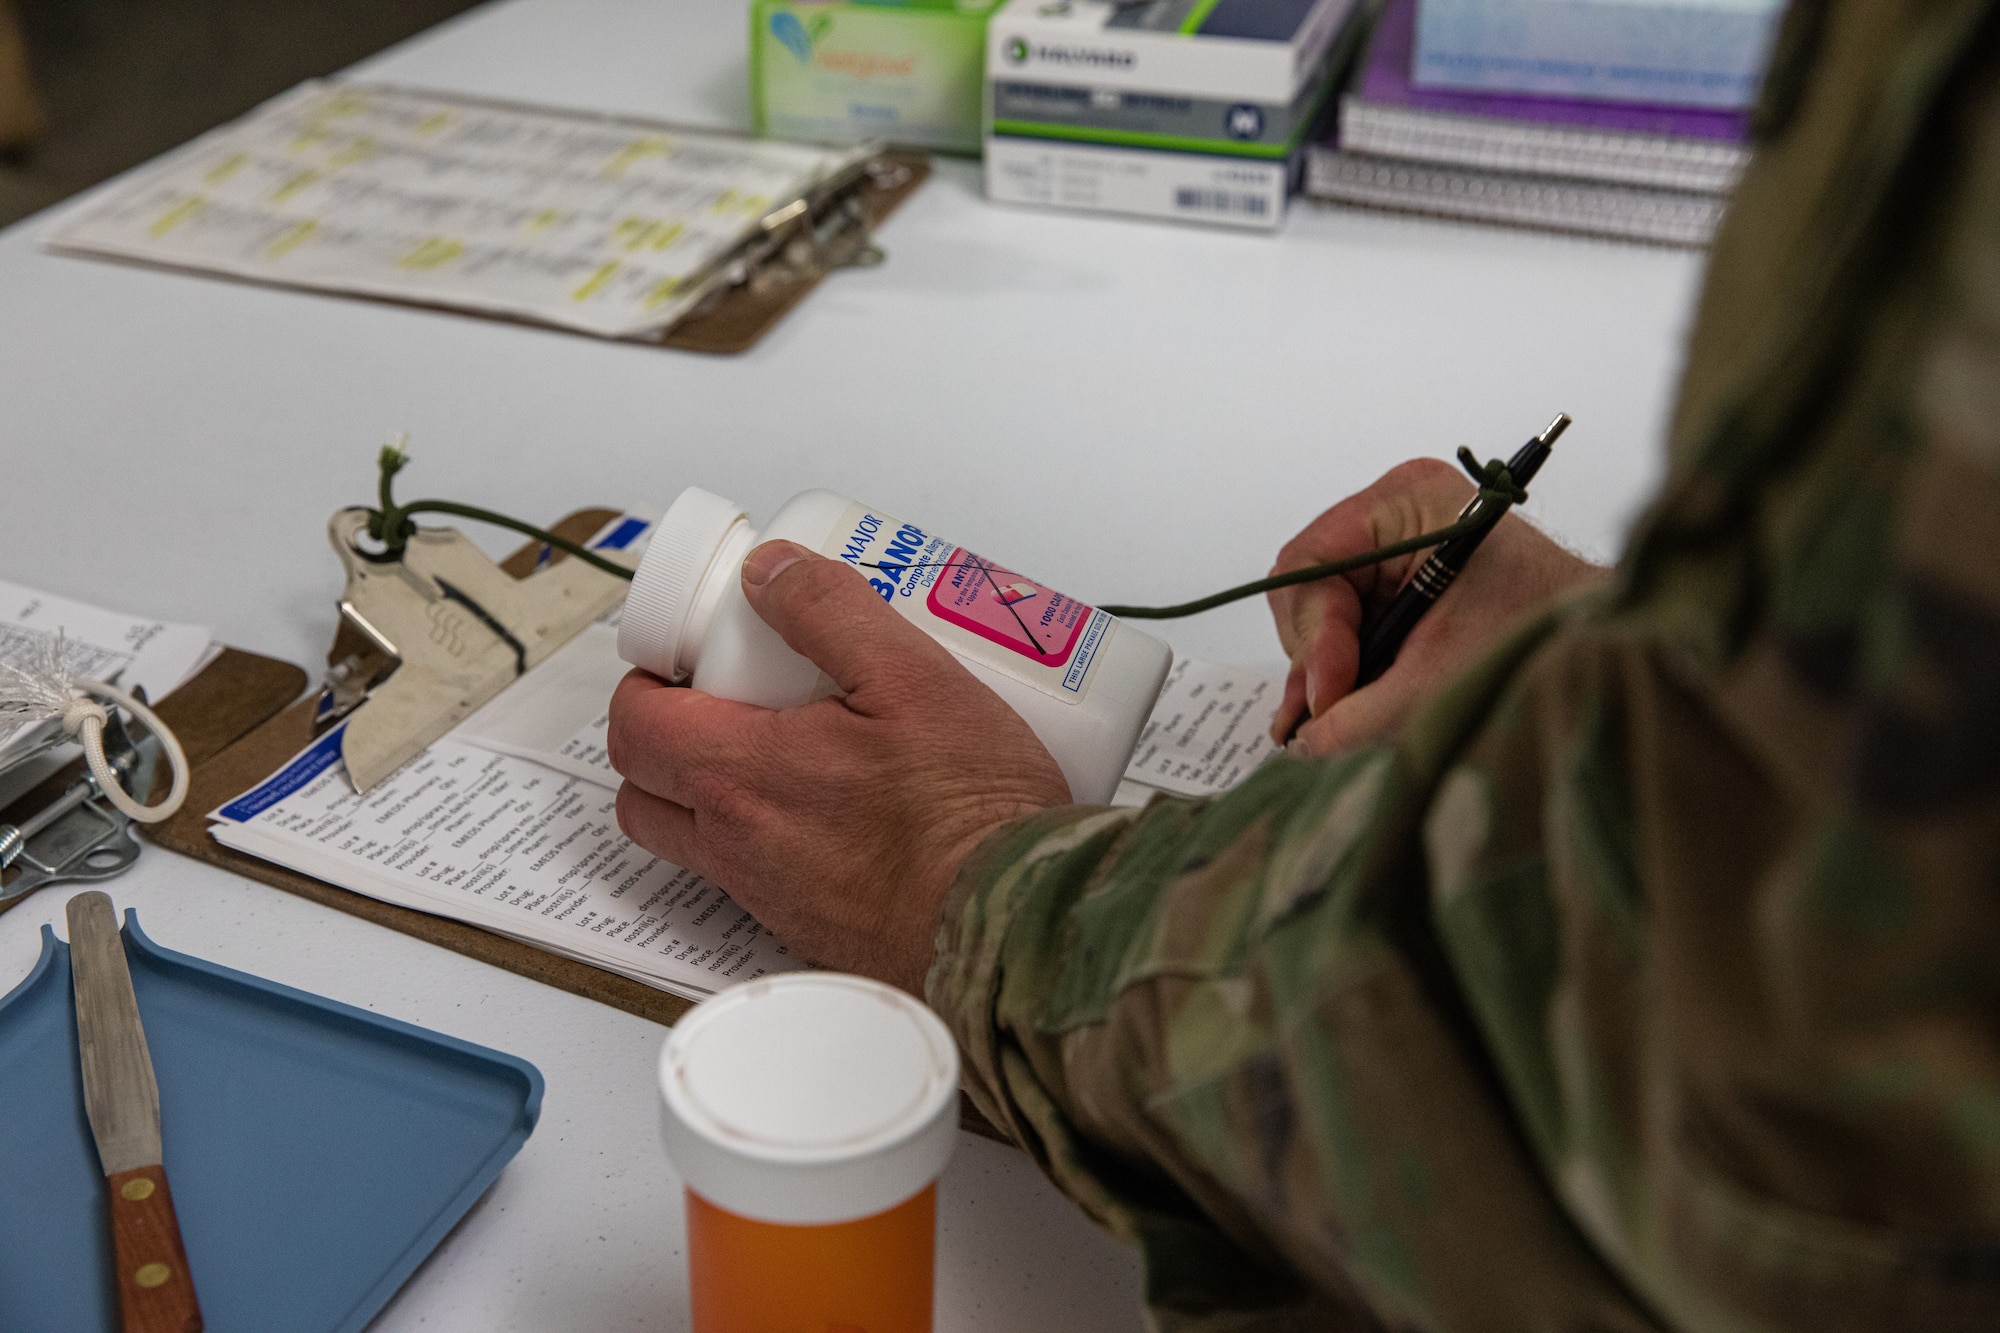 U.S. Air Force Staff Sgt. Dustin Stevens, Task Force Holloman pharmacy lead, prescribes medication to Afghan evacuees on Holloman Air Force Base, New Mexico, Oct. 14, 2021. The Department of Defense, through U.S. Northern Command, and in support of the Department of Homeland Security, is providing transportation, temporary housing, medical screening, and general support for at least 50,000 Afghan evacuees at suitable facilities, in permanent or temporary structures, as quickly as possible. This initiative provides Afghan personnel essential support at secure locations outside Afghanistan. (U.S. Army photo by Pfc. Anthony Sanchez)